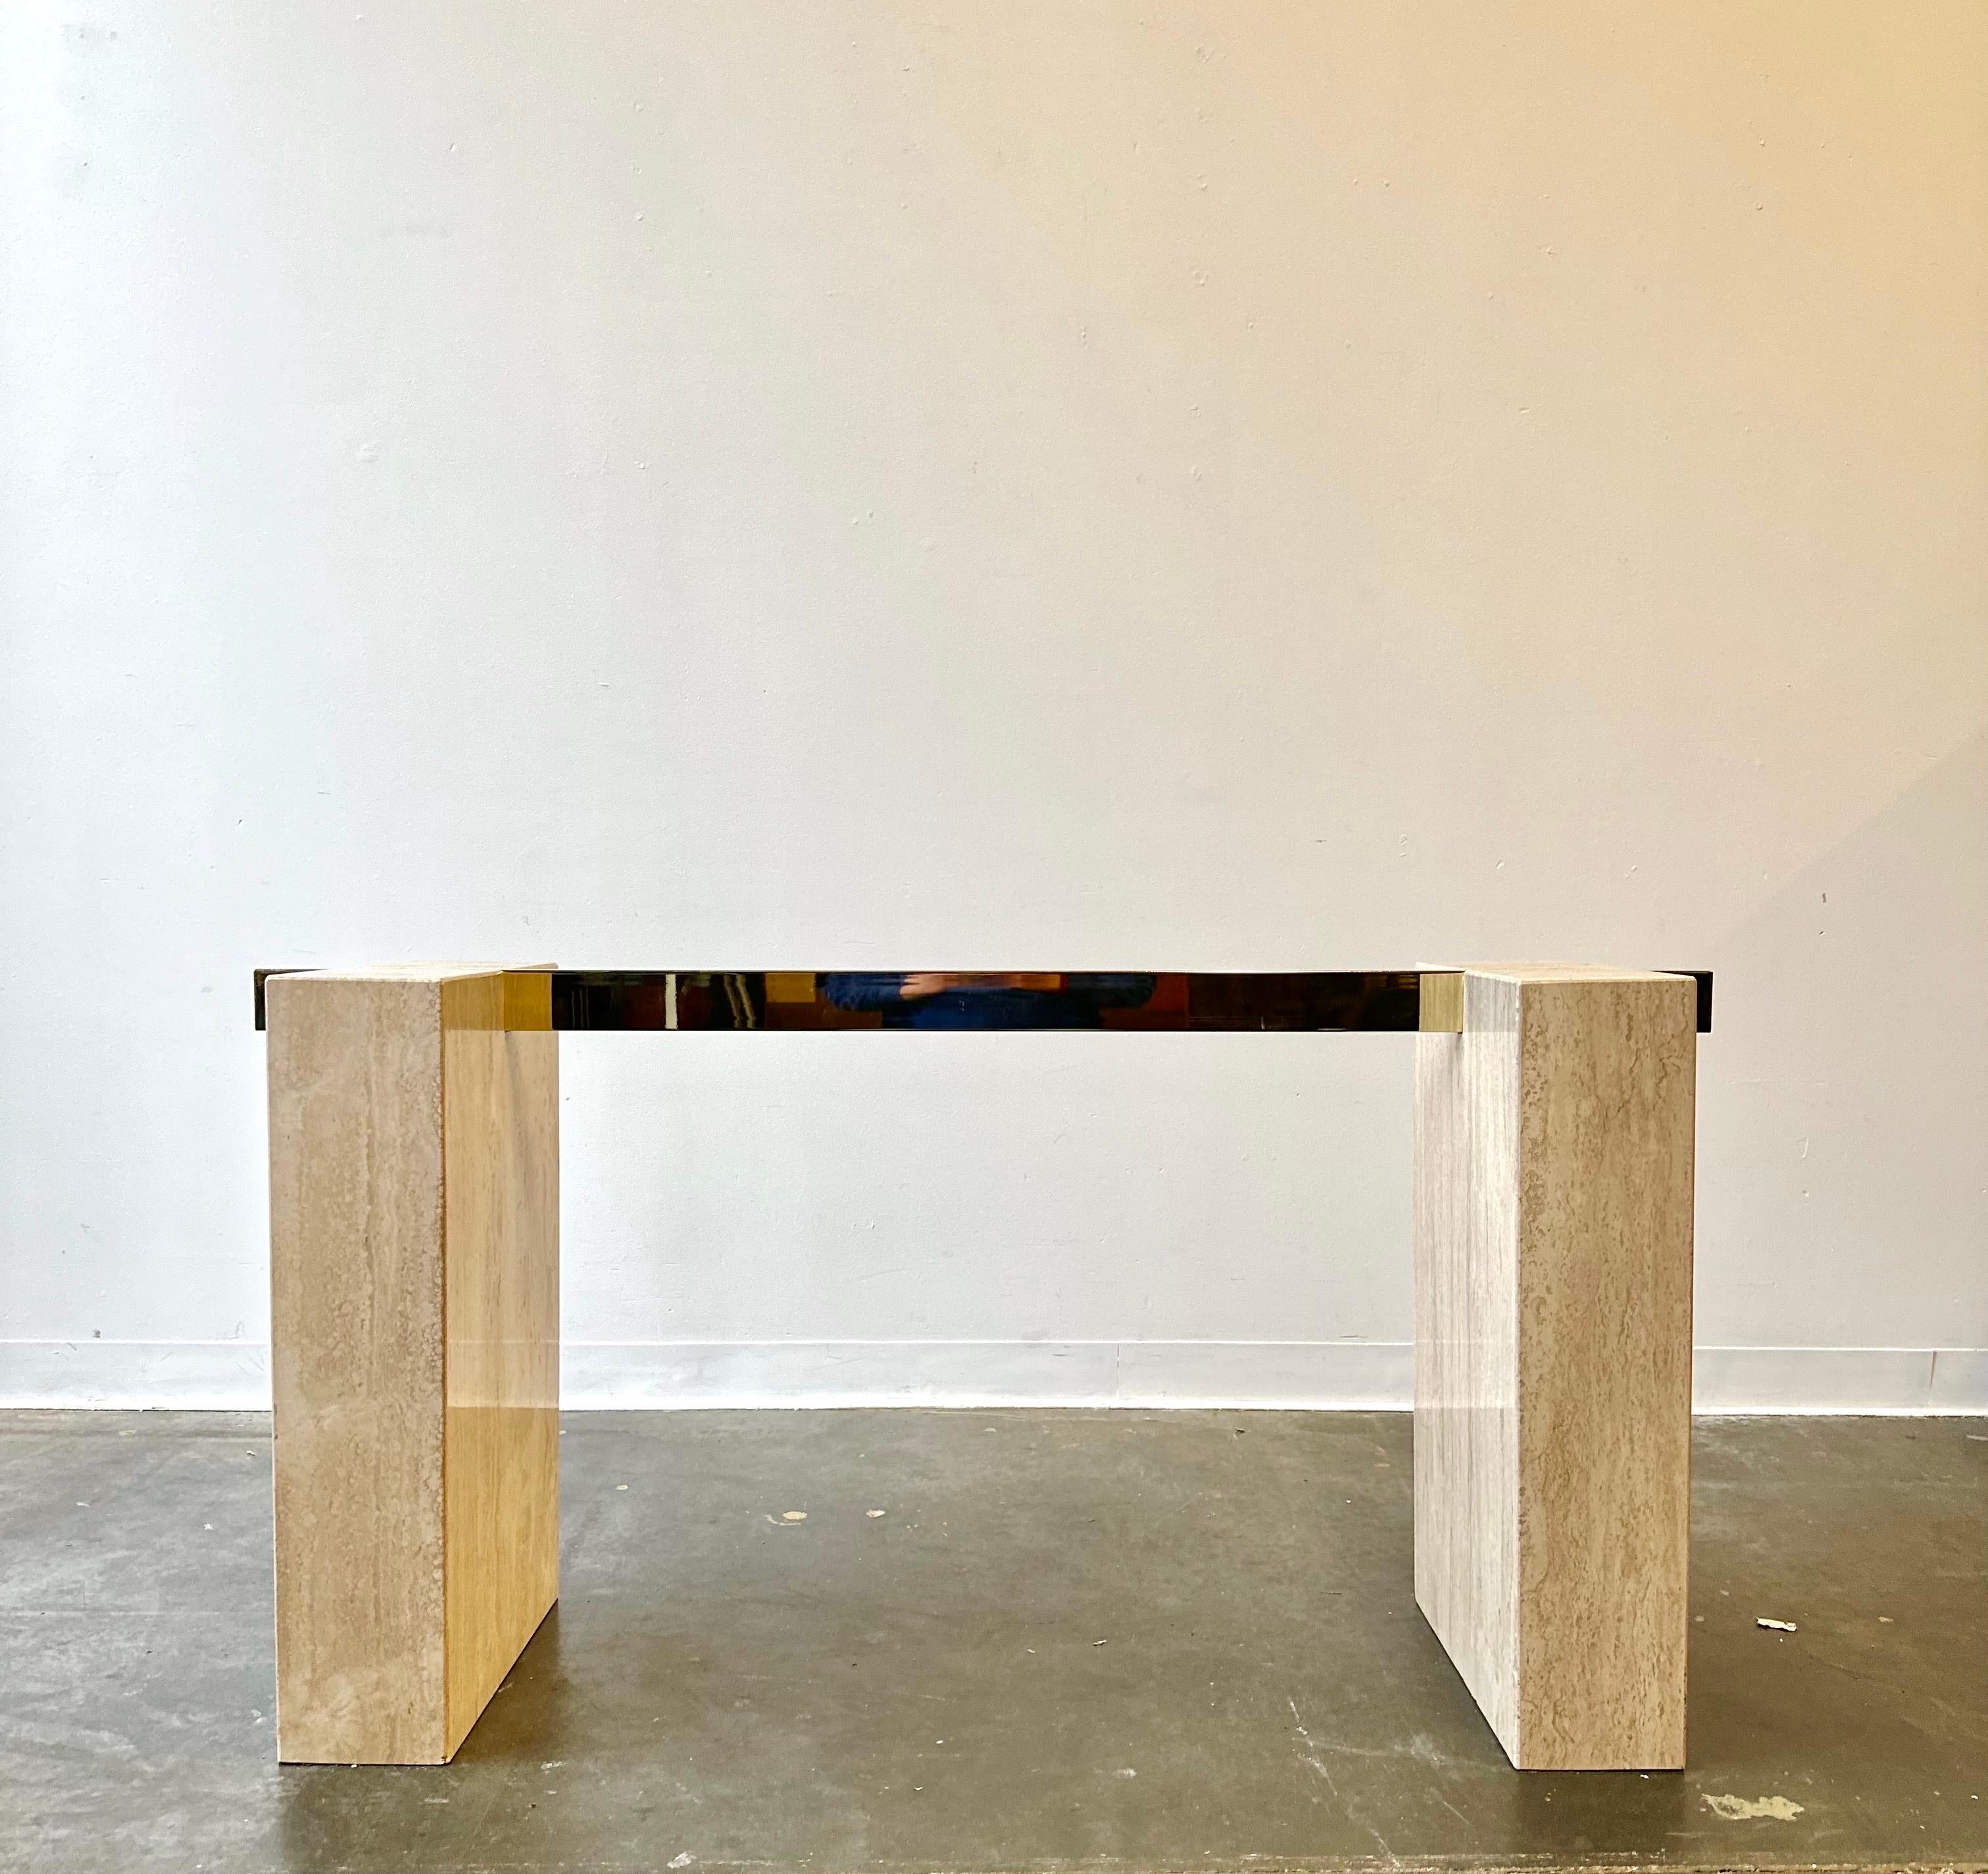 Offered is a stunning, 1970s Italian limestone/travertine dining table by Guy Barker for Ello Furniture Company. The piece has a thick 0.75in tempered beveled glass top, rested upon a single polished brass arm and two limestone/travertine bases.